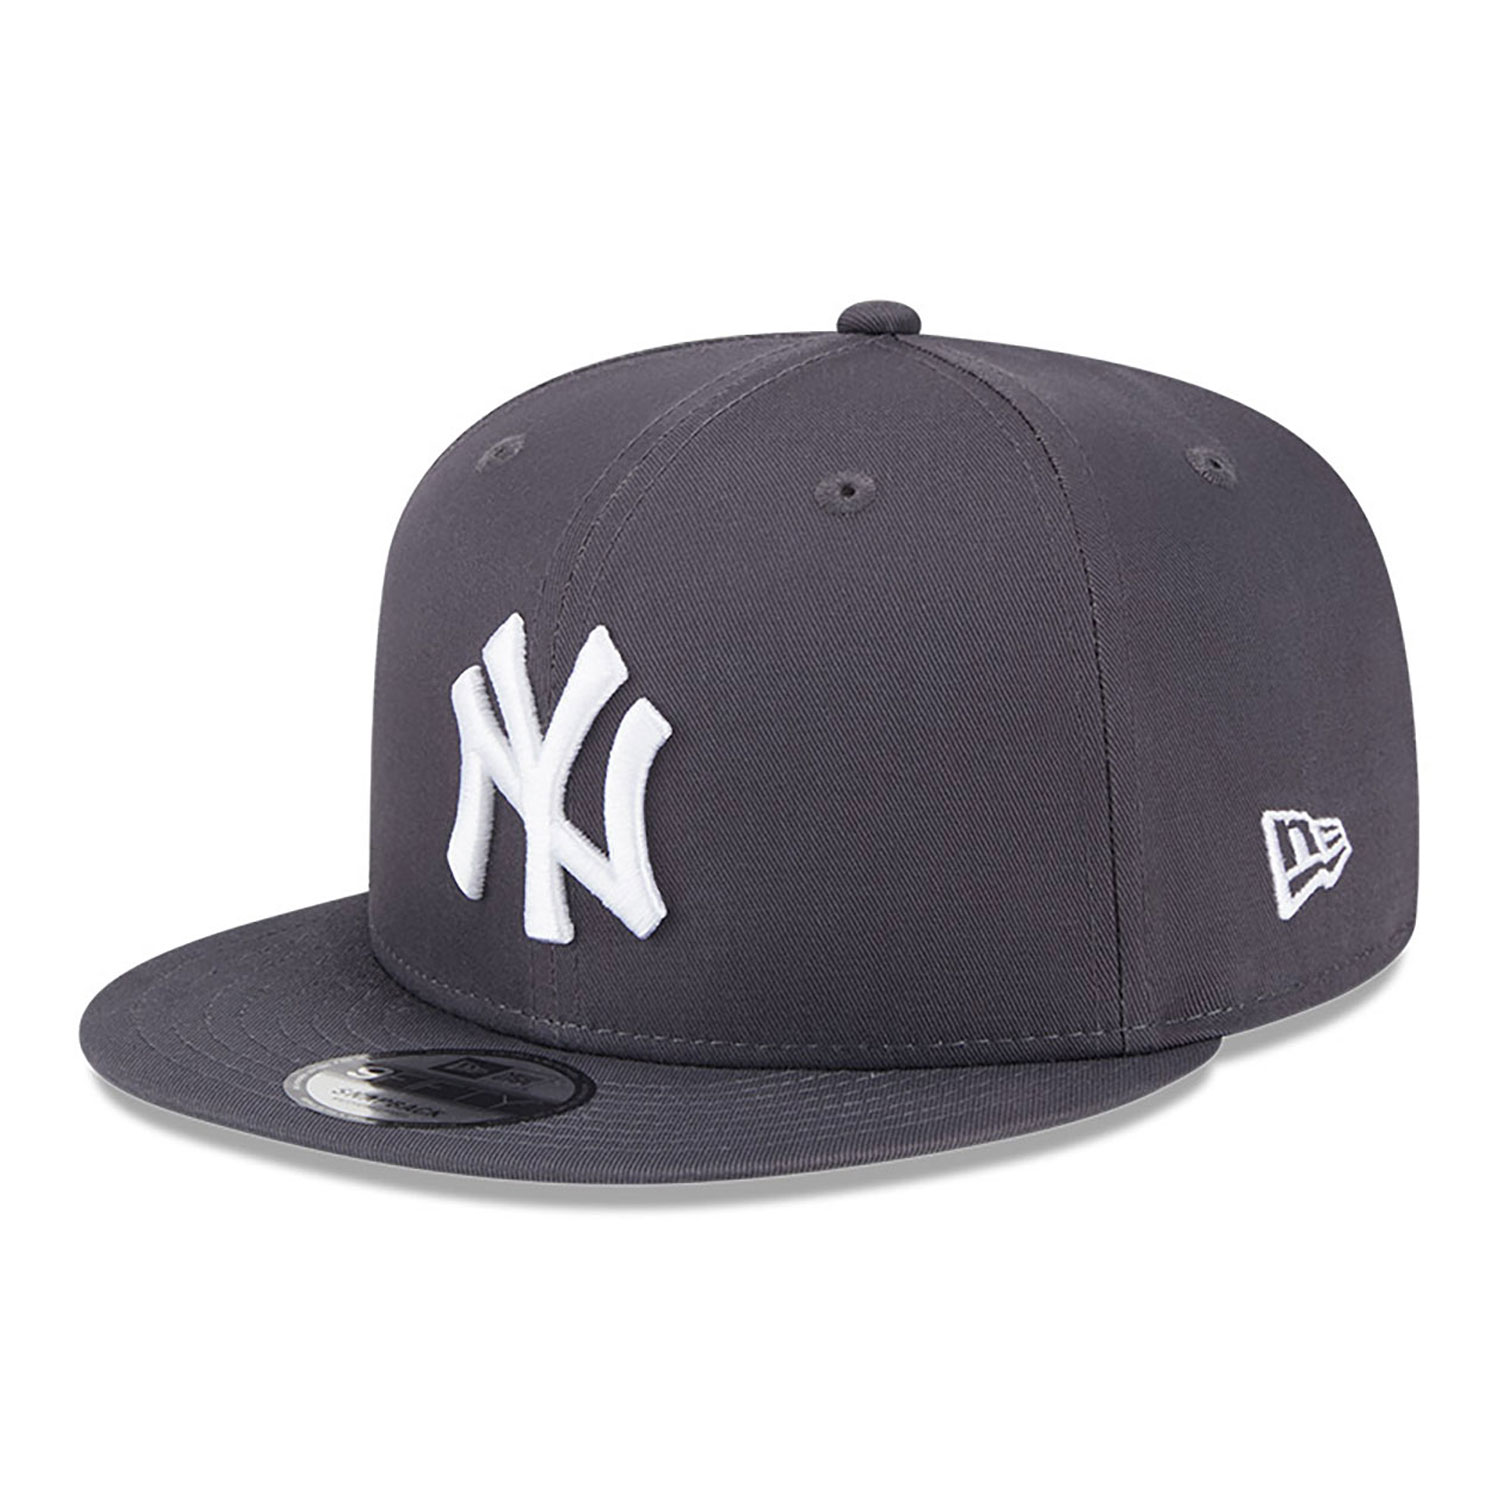 New York Yankees New Traditions Grey 9FIFTY Snapback Cap